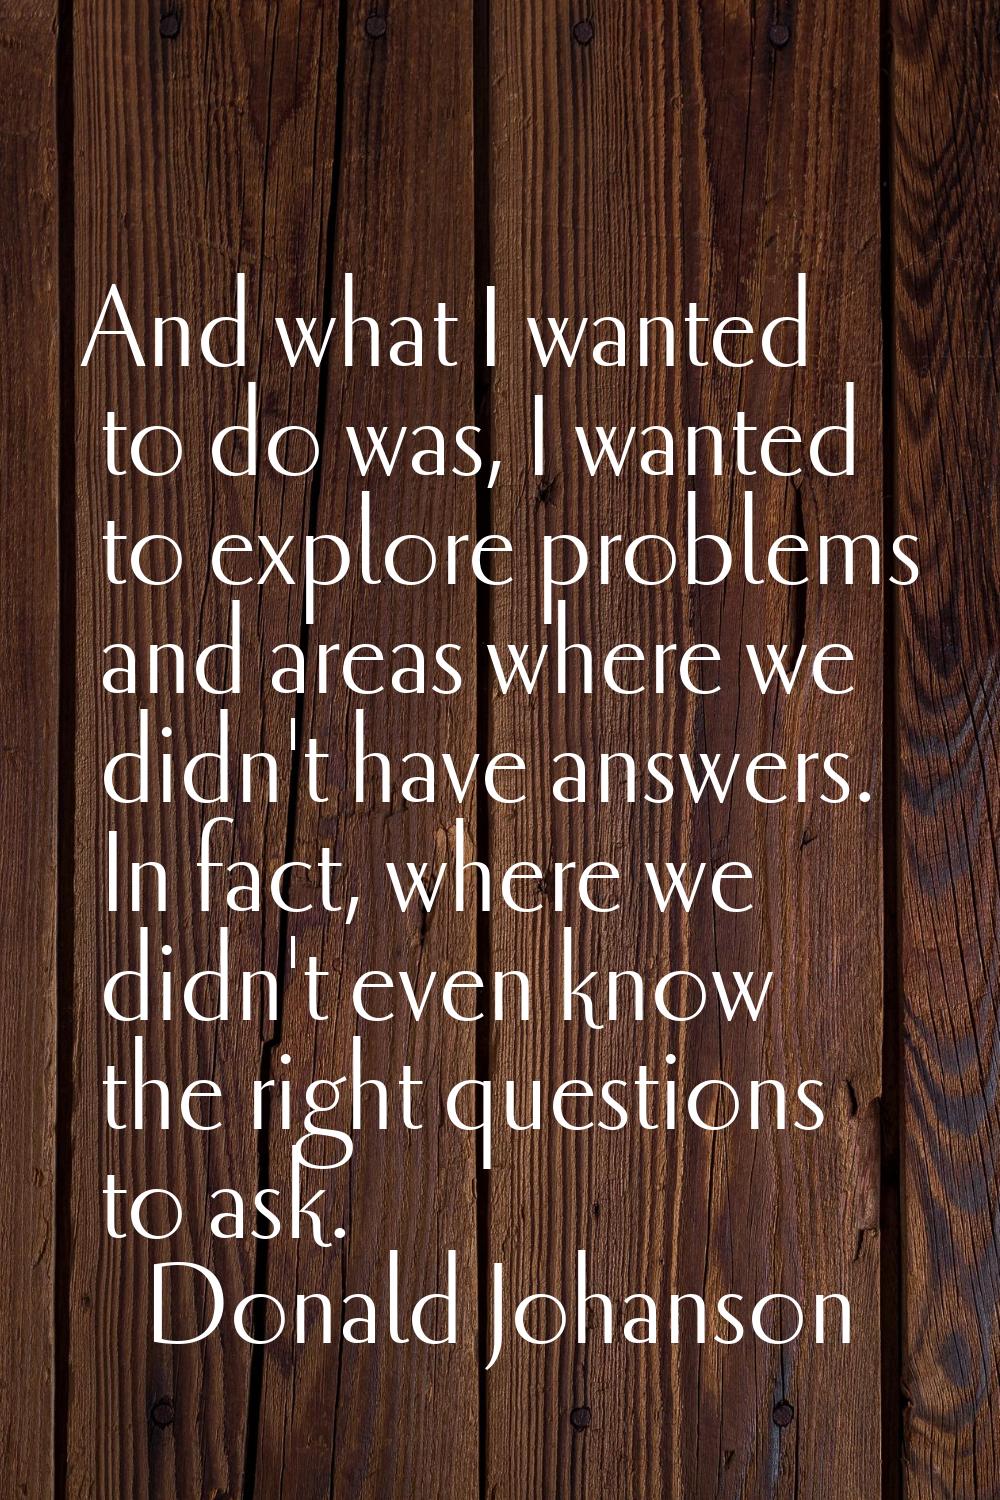 And what I wanted to do was, I wanted to explore problems and areas where we didn't have answers. I